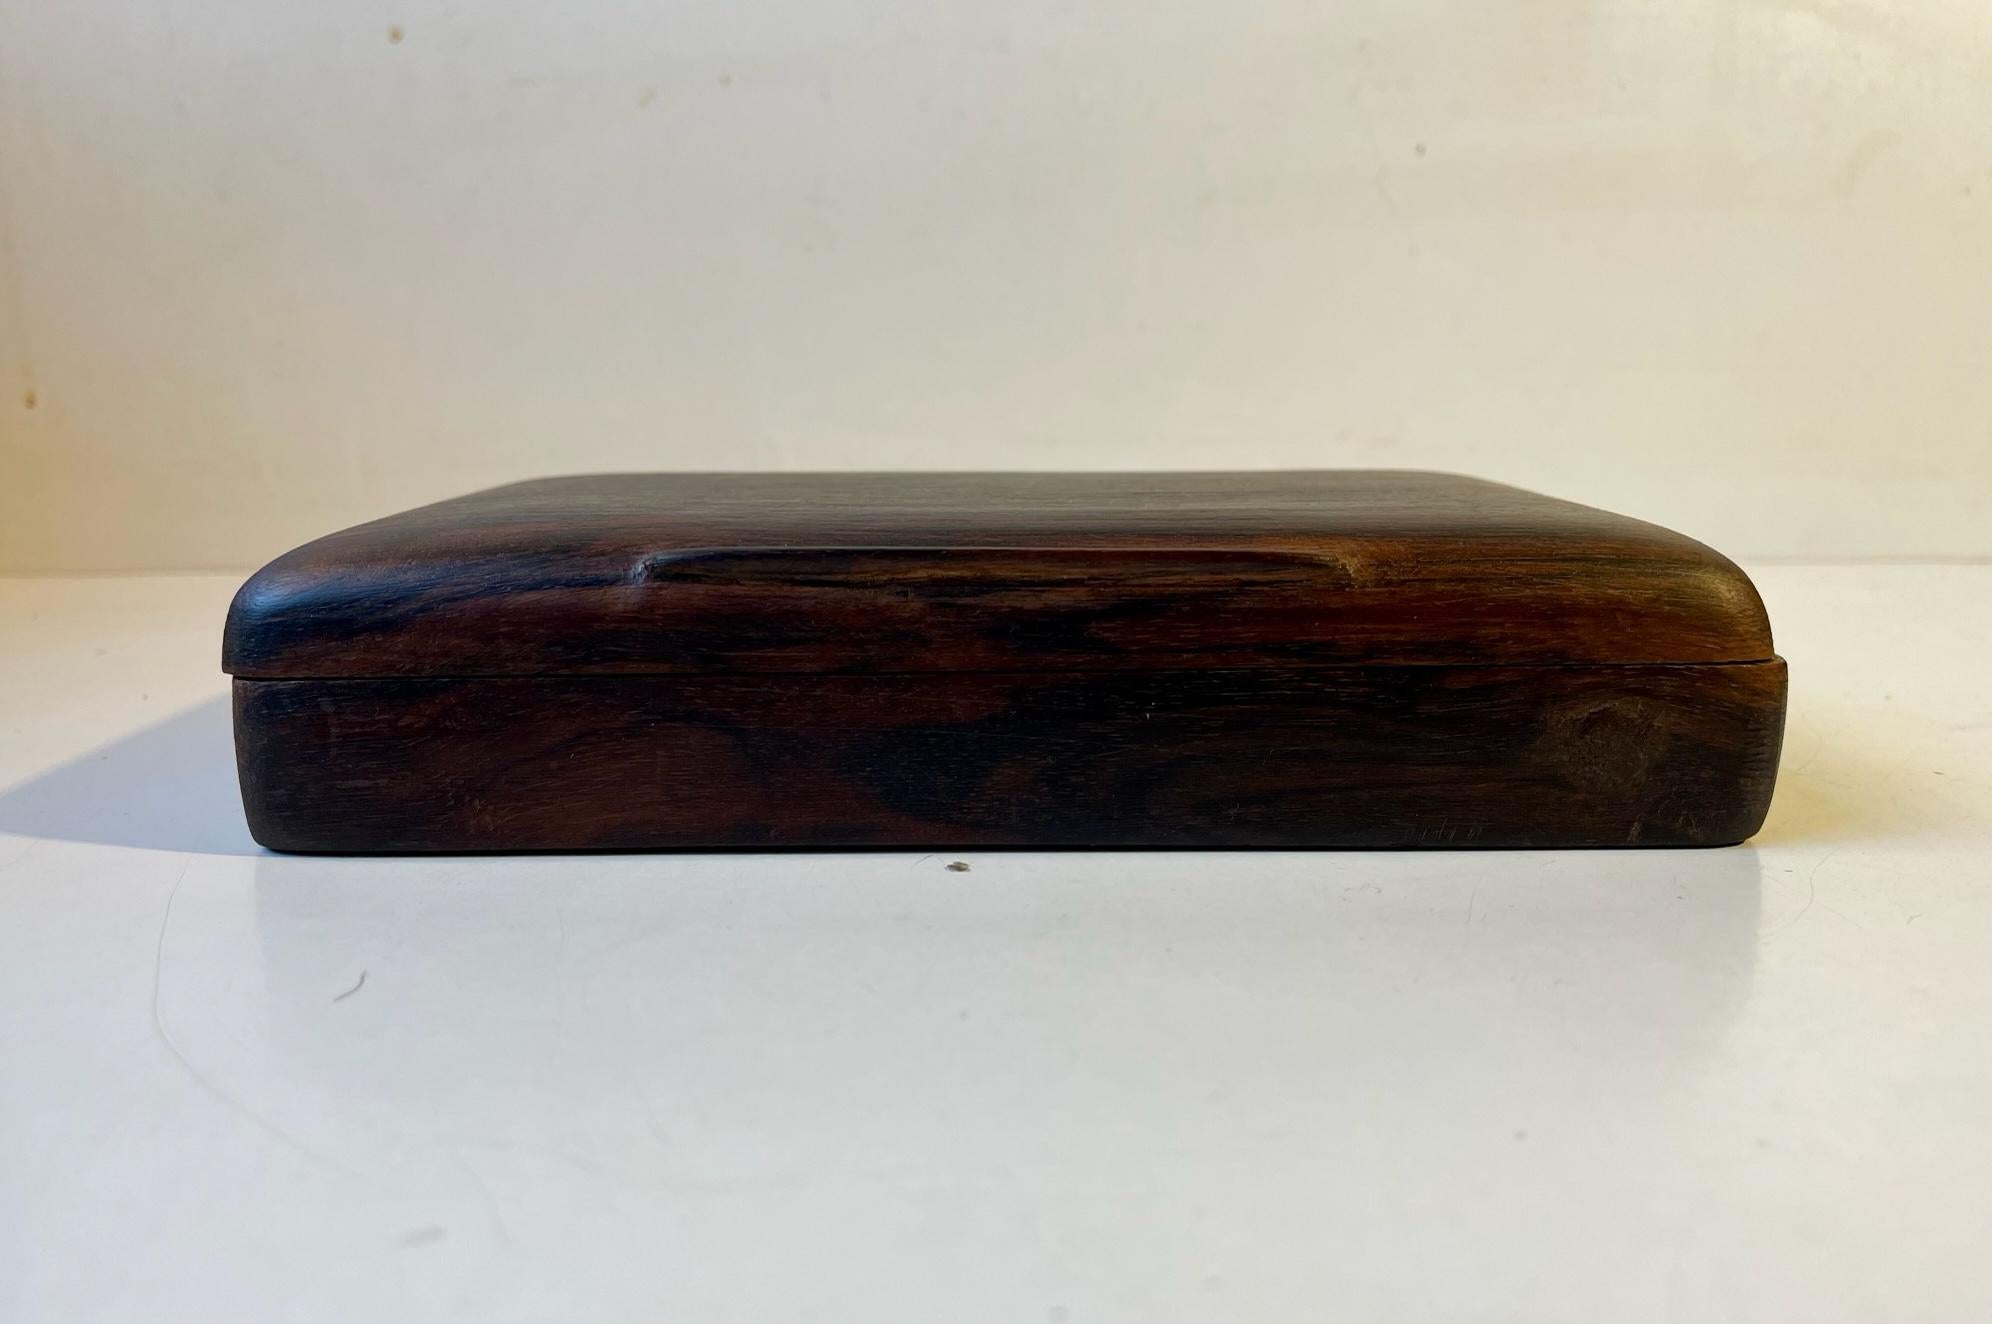 A handmade box for cigarettes and /or cigars. Its made from solid rosewood and displays beautiful craftsmanship with its rounded of edges and particularly to the carved and lid-opener. It features two square compartments. Measurements: 20 x 13 x 4